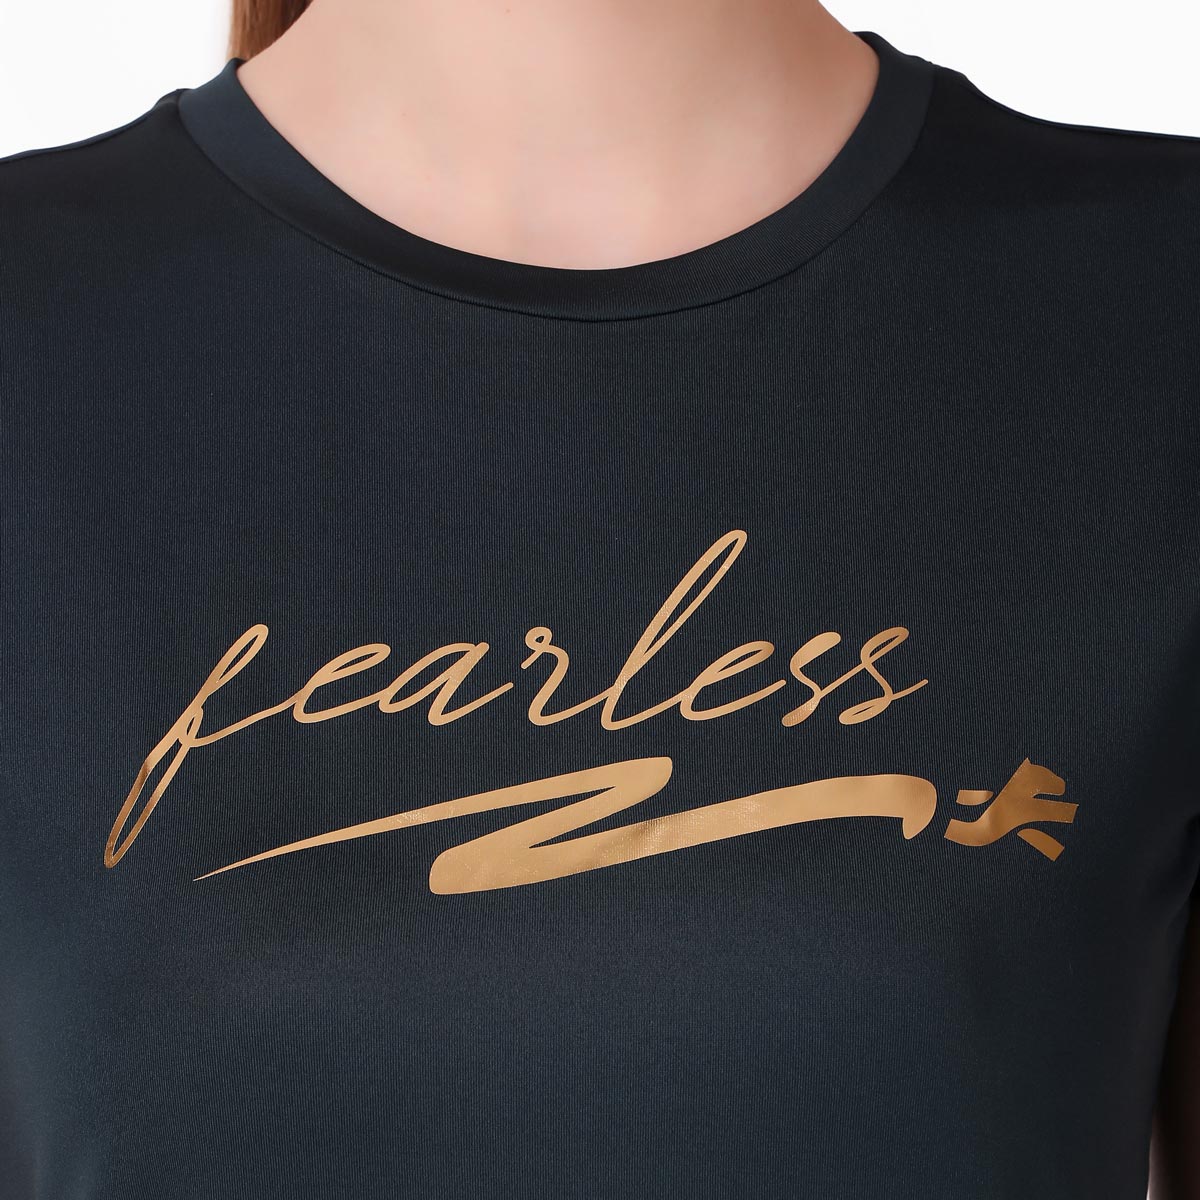 Performance Tshirt For Fearless Women (Olive)